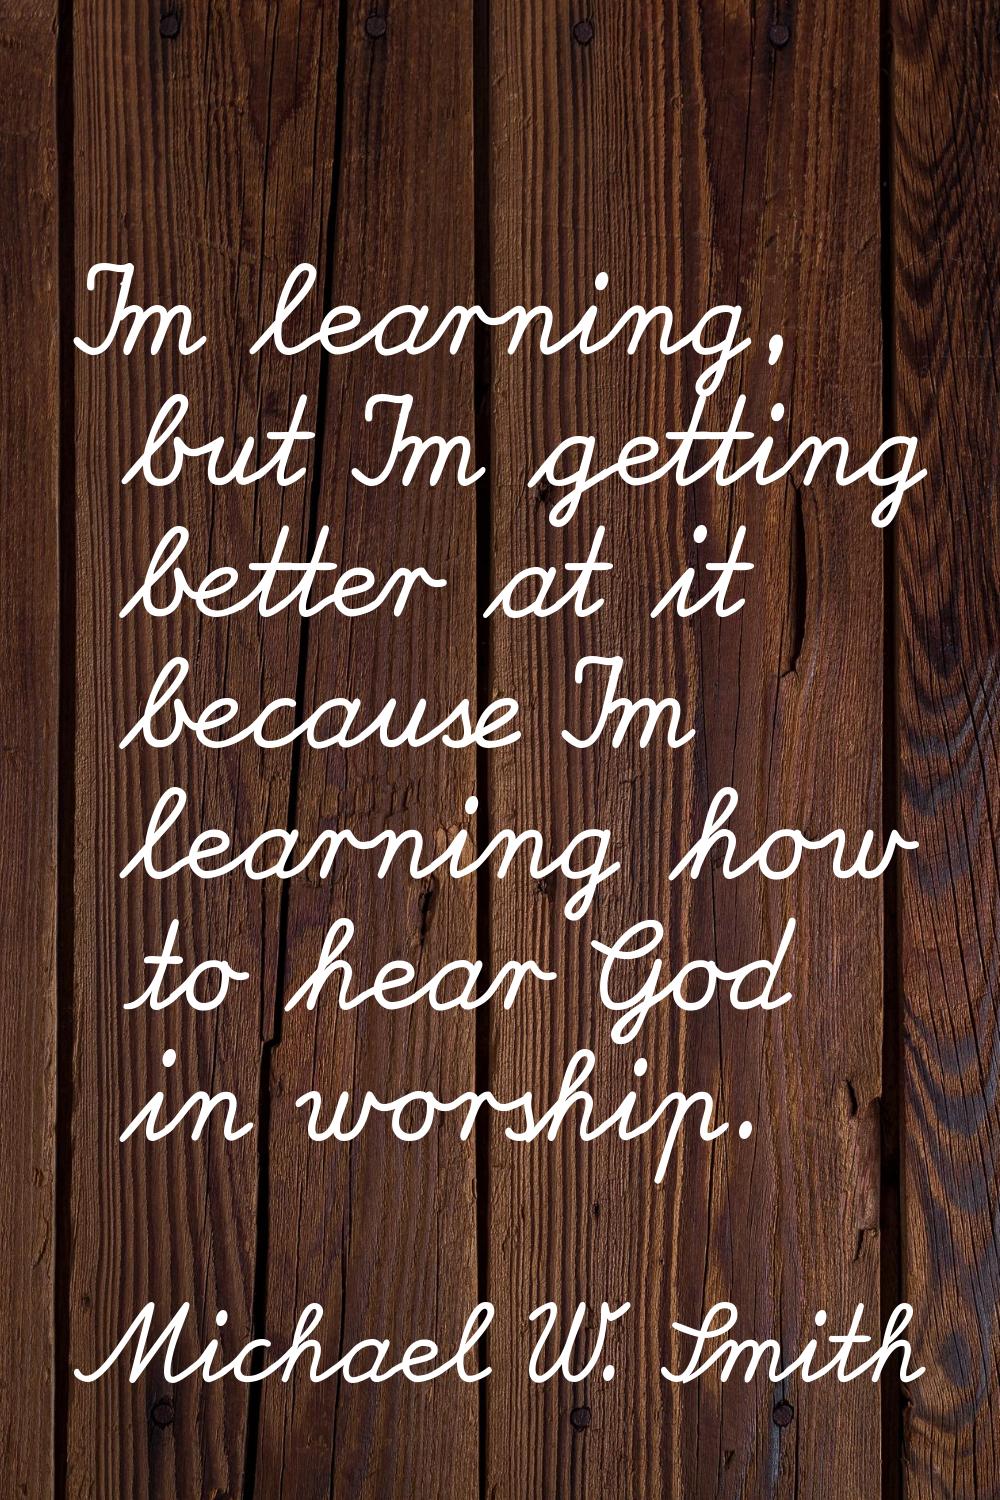 I'm learning, but I'm getting better at it because I'm learning how to hear God in worship.